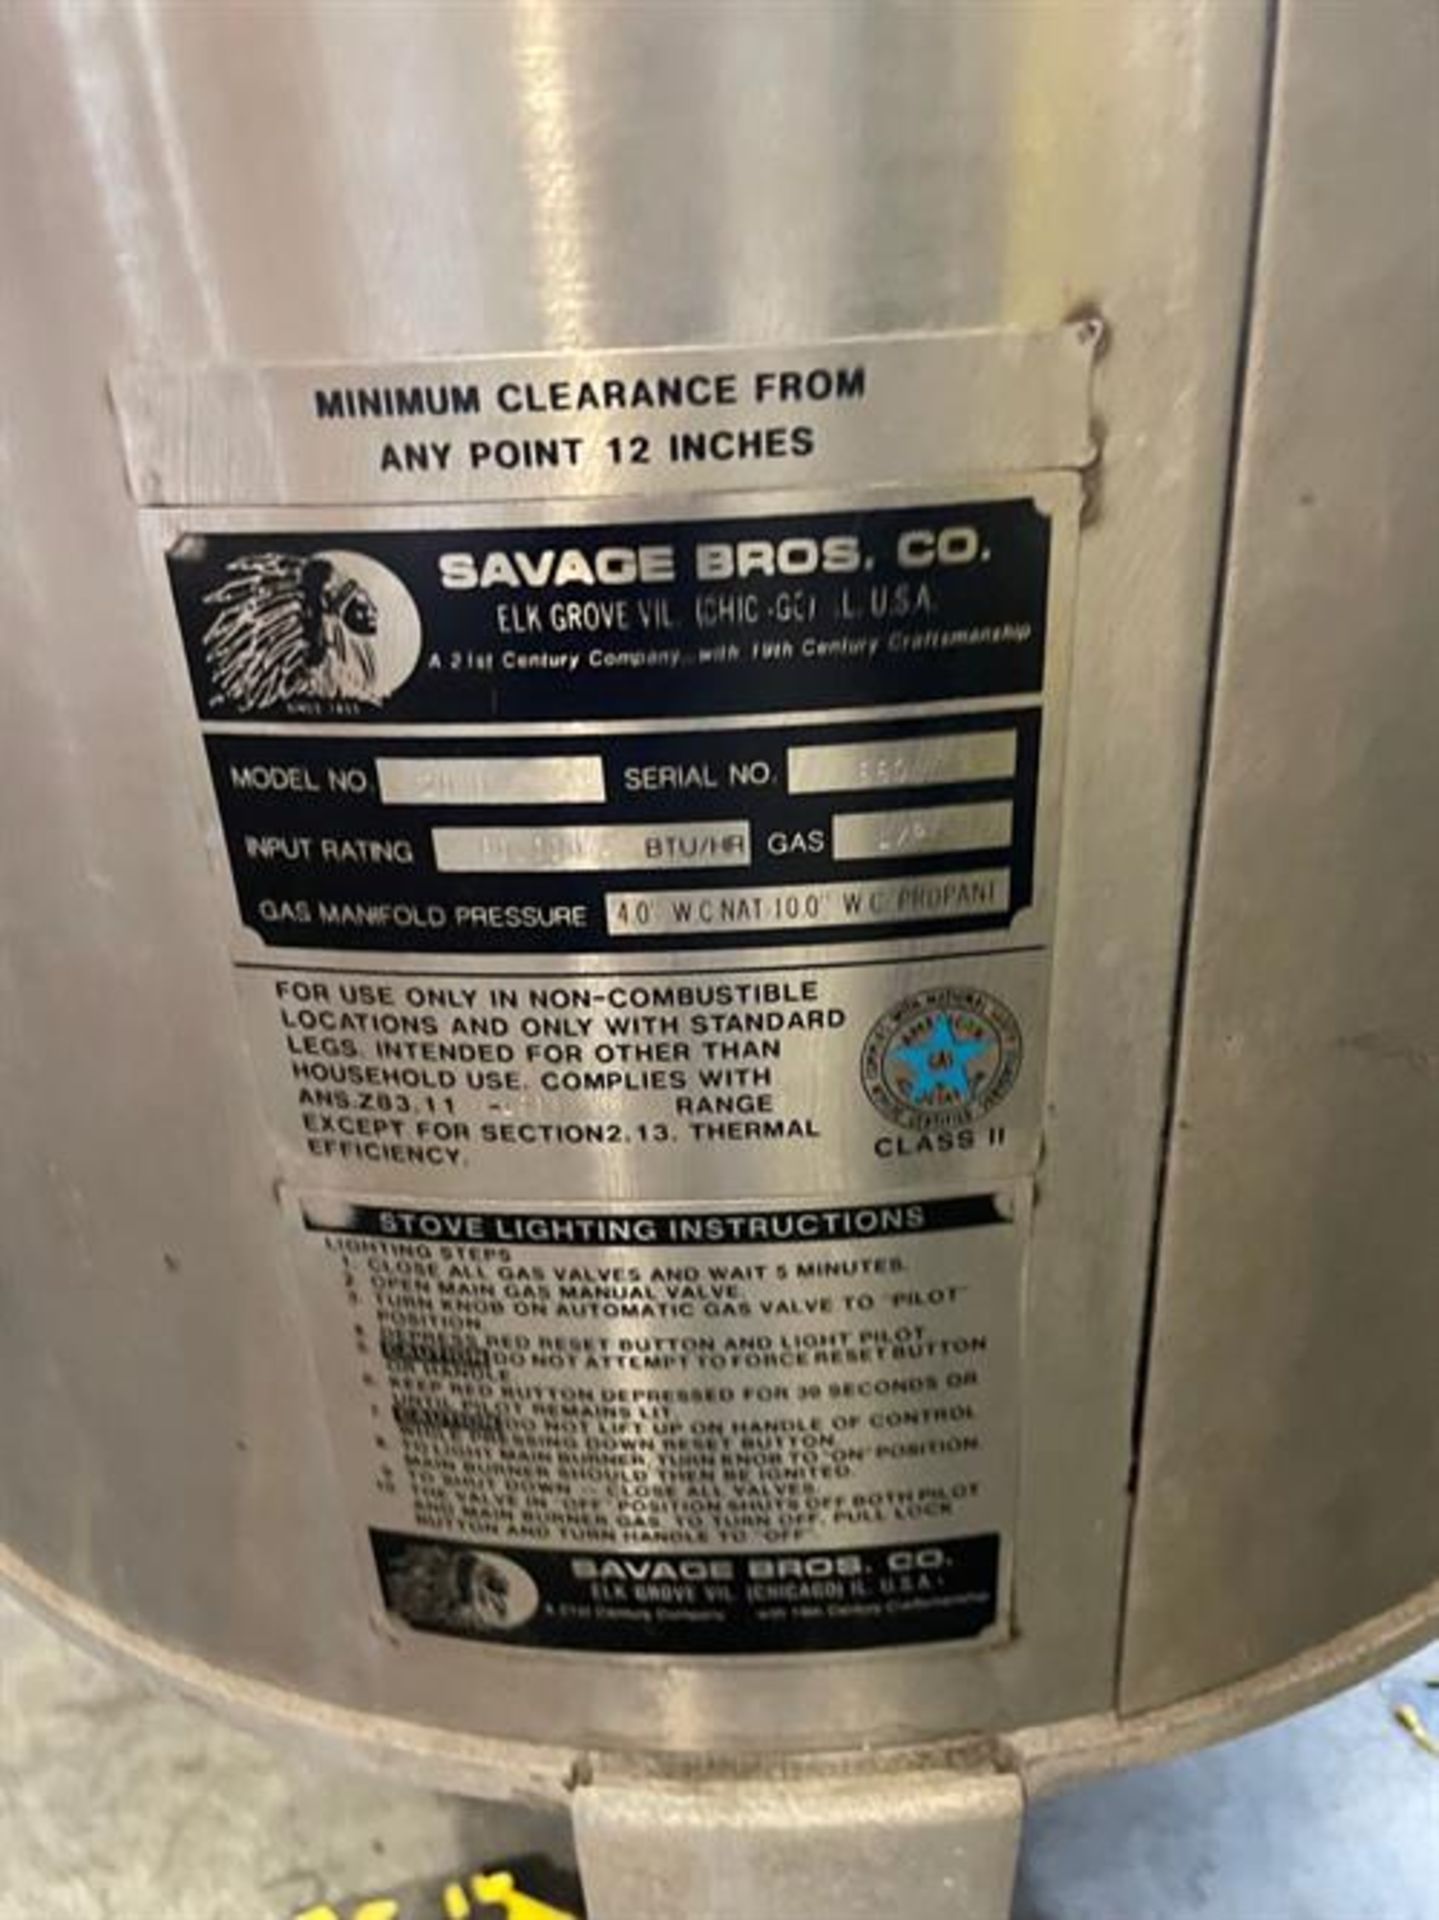 Savage # 20 Gas Fired Stove - Serial number 660 - Set for LP - Copper pot 20" x 14" deep - Rigging/ - Image 4 of 6